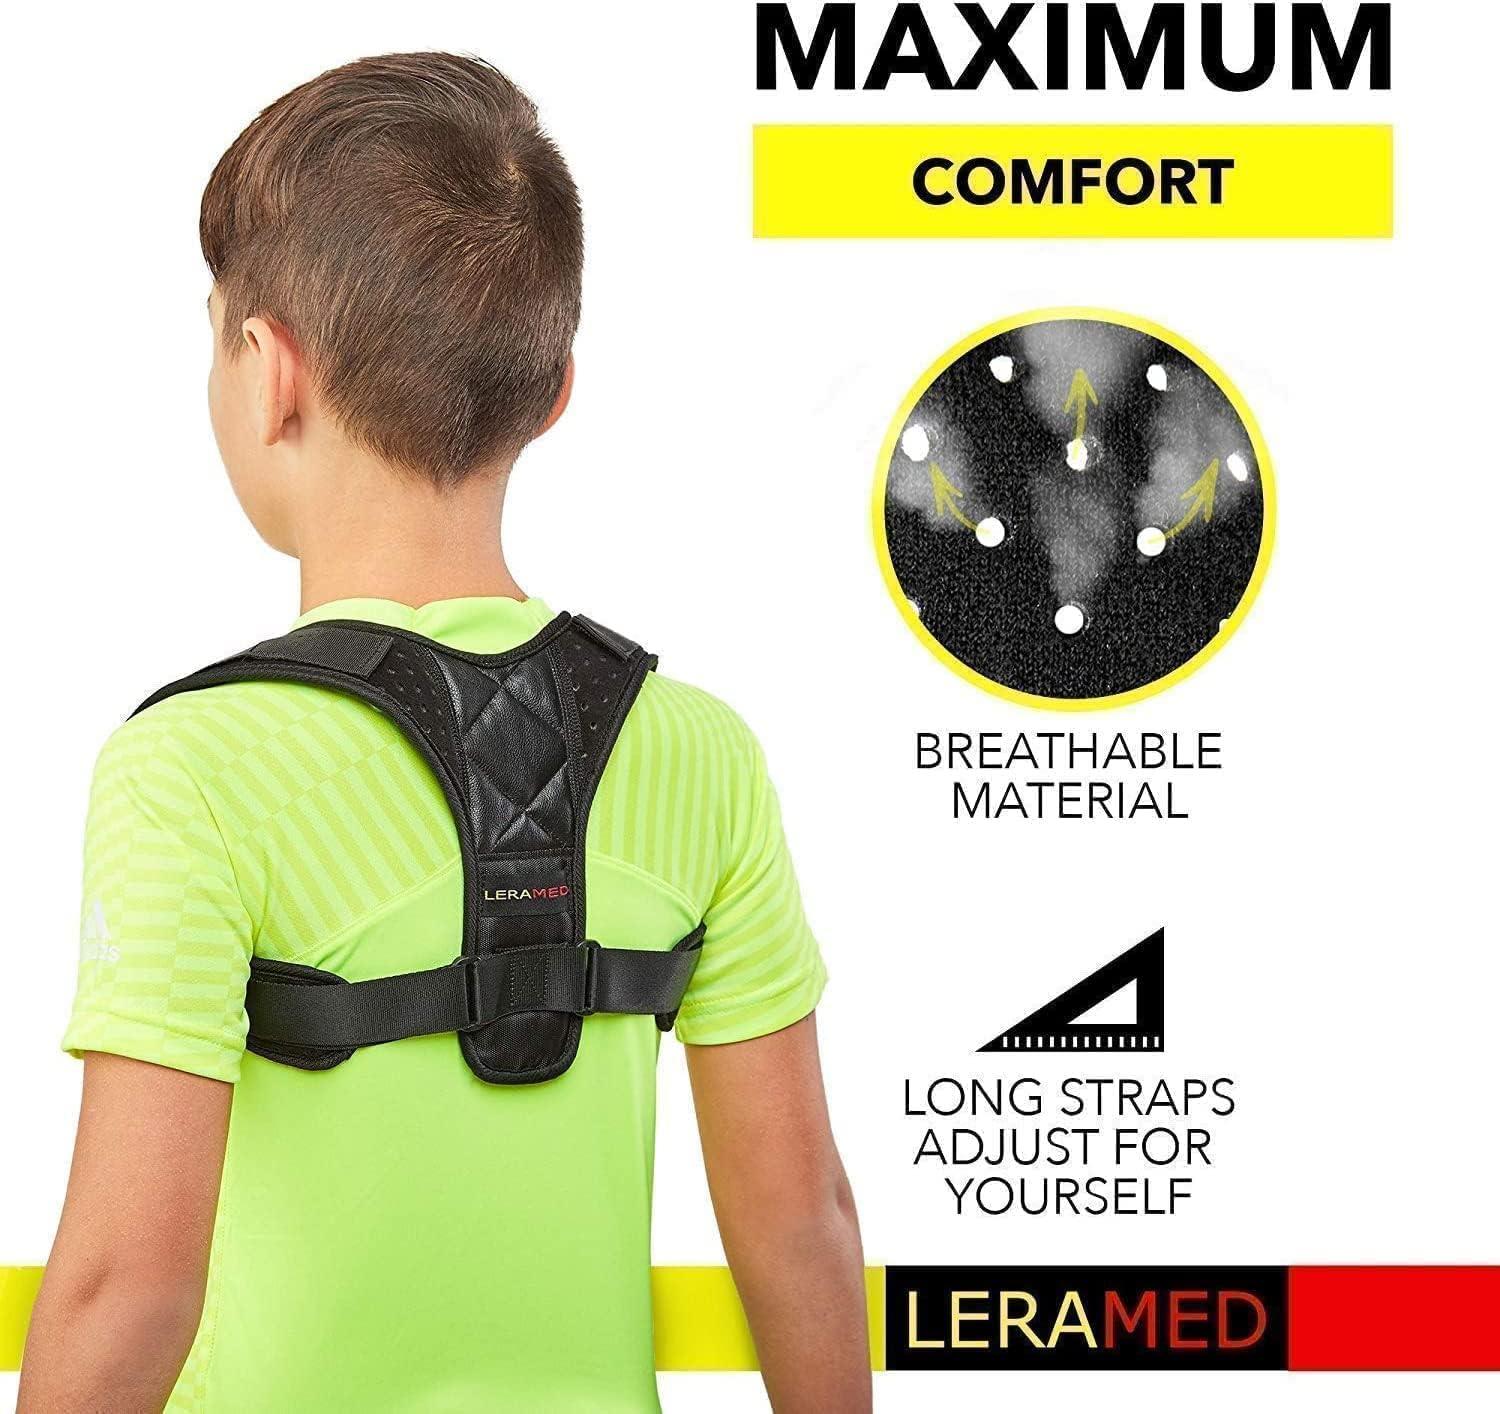 Updated Posture Corrector for Women, Adjustable Upper Back Brace for  Clavicle Support and Providing Pain Relief from Neck, Shoulder -  Comfortable